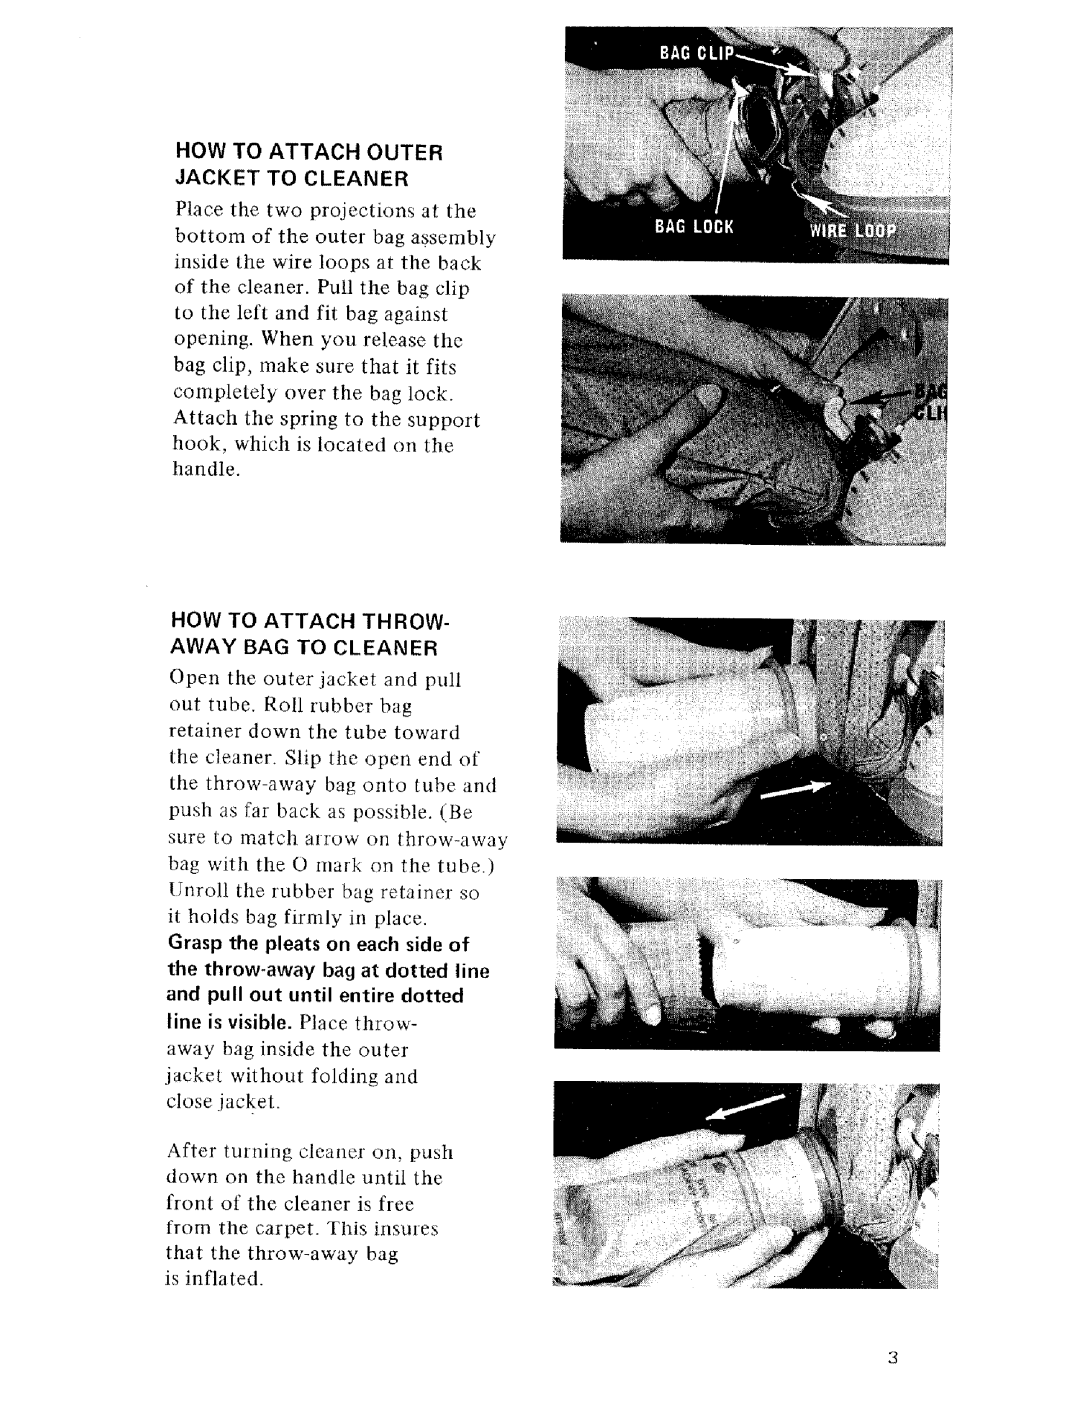 Hoover U4001 owner manual How To Attach Outer Jacket To Cleaner 